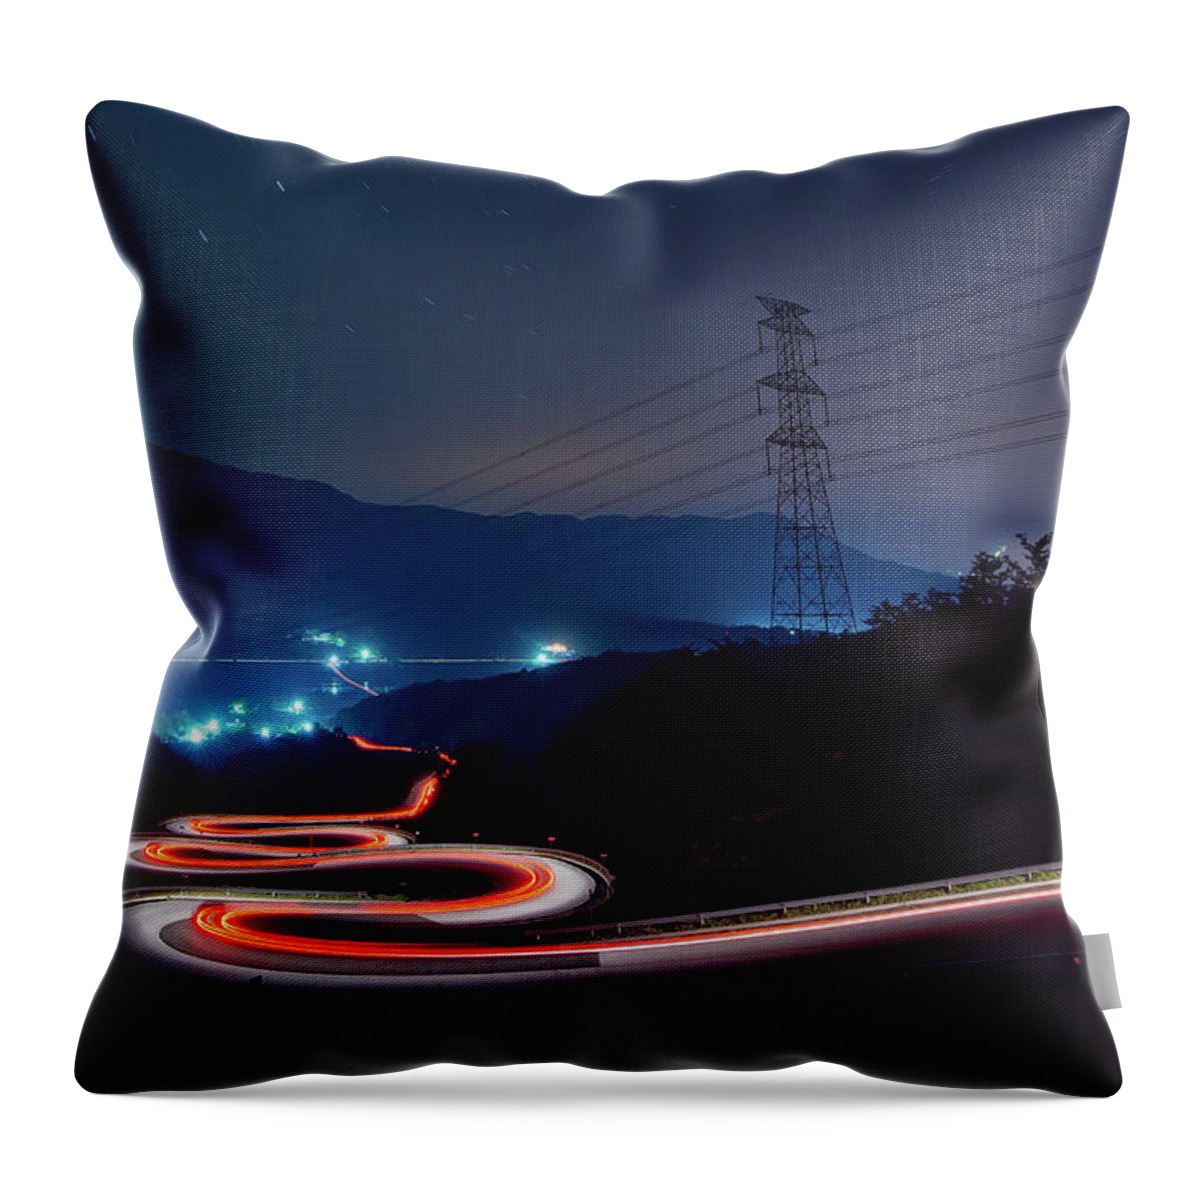 Electricity Pylon Throw Pillow featuring the photograph Light Trails Of Cars On The Zigzag Way #2 by Tokism